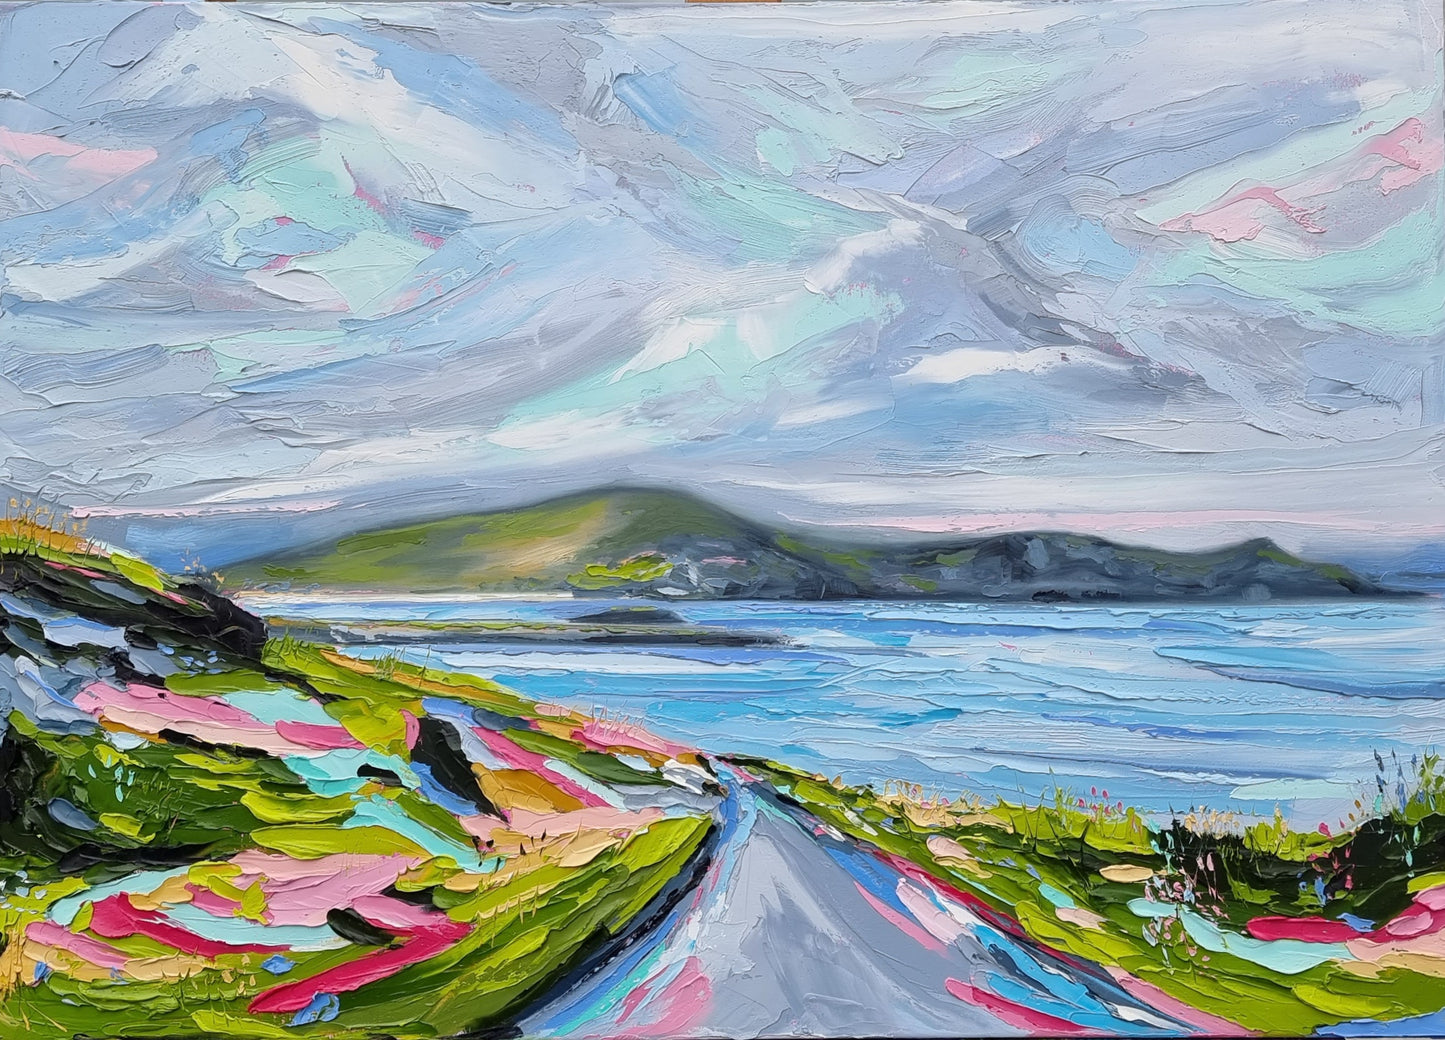 An original oil painting inspired by exploring the rugged scenery of Achill Island in Co. Mayo, on the west coast of Ireland. I've used vibrant colours in this painting to encapsulate the uplifting feelings associated with breathing in the stunning coastal views on a journey through Achill.